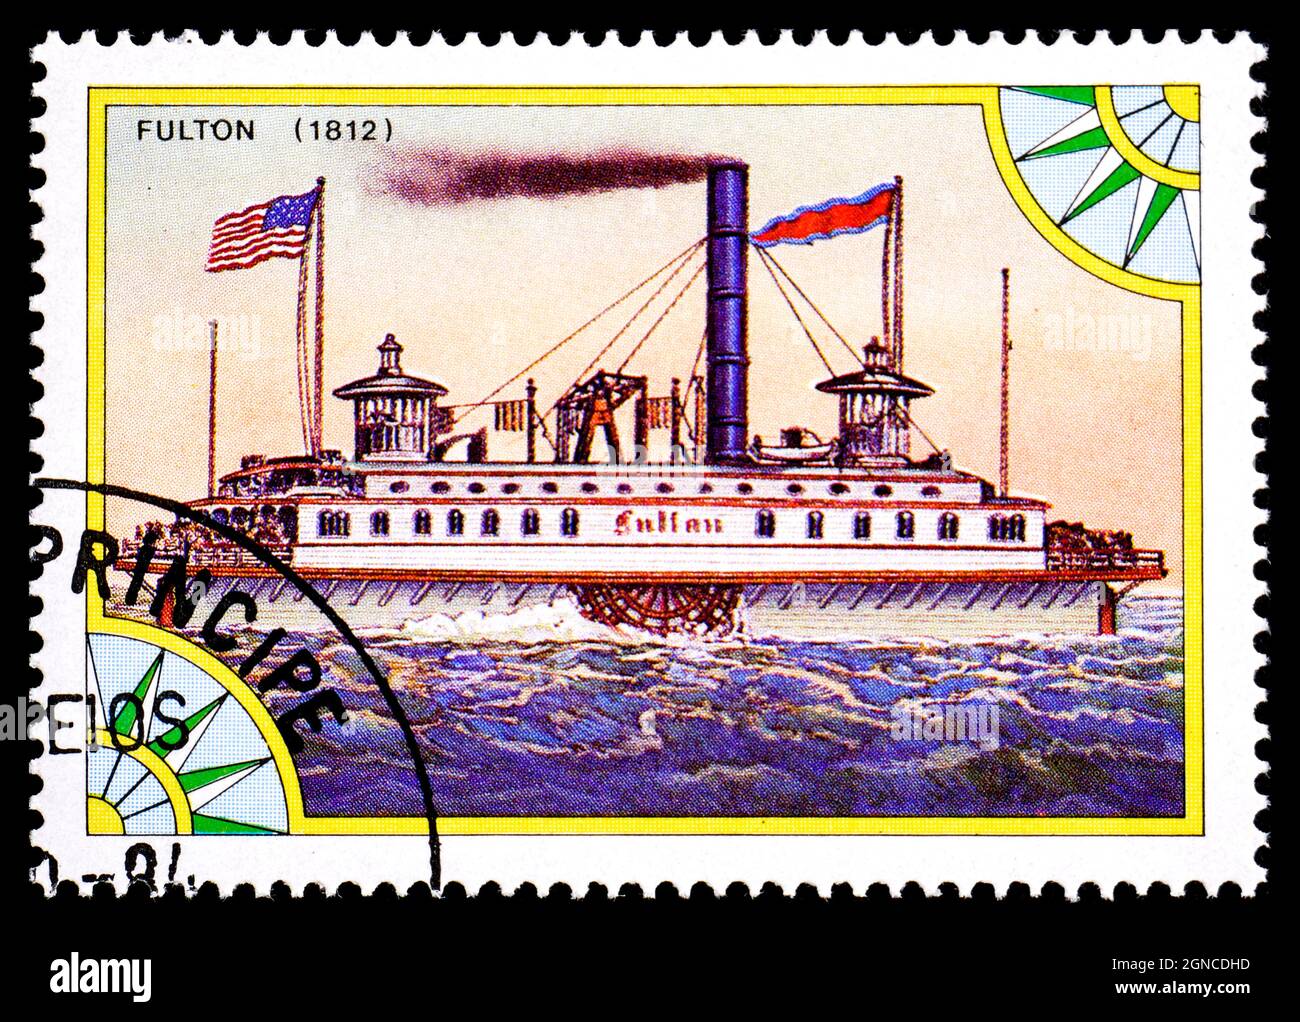 ST. THOMAS AND PRINCE ISLANDS - CIRCA 1984: A stamp printed in St. Thomas and Prince Islands shows steamship Fulton 1812, series is devoted to the Stock Photo